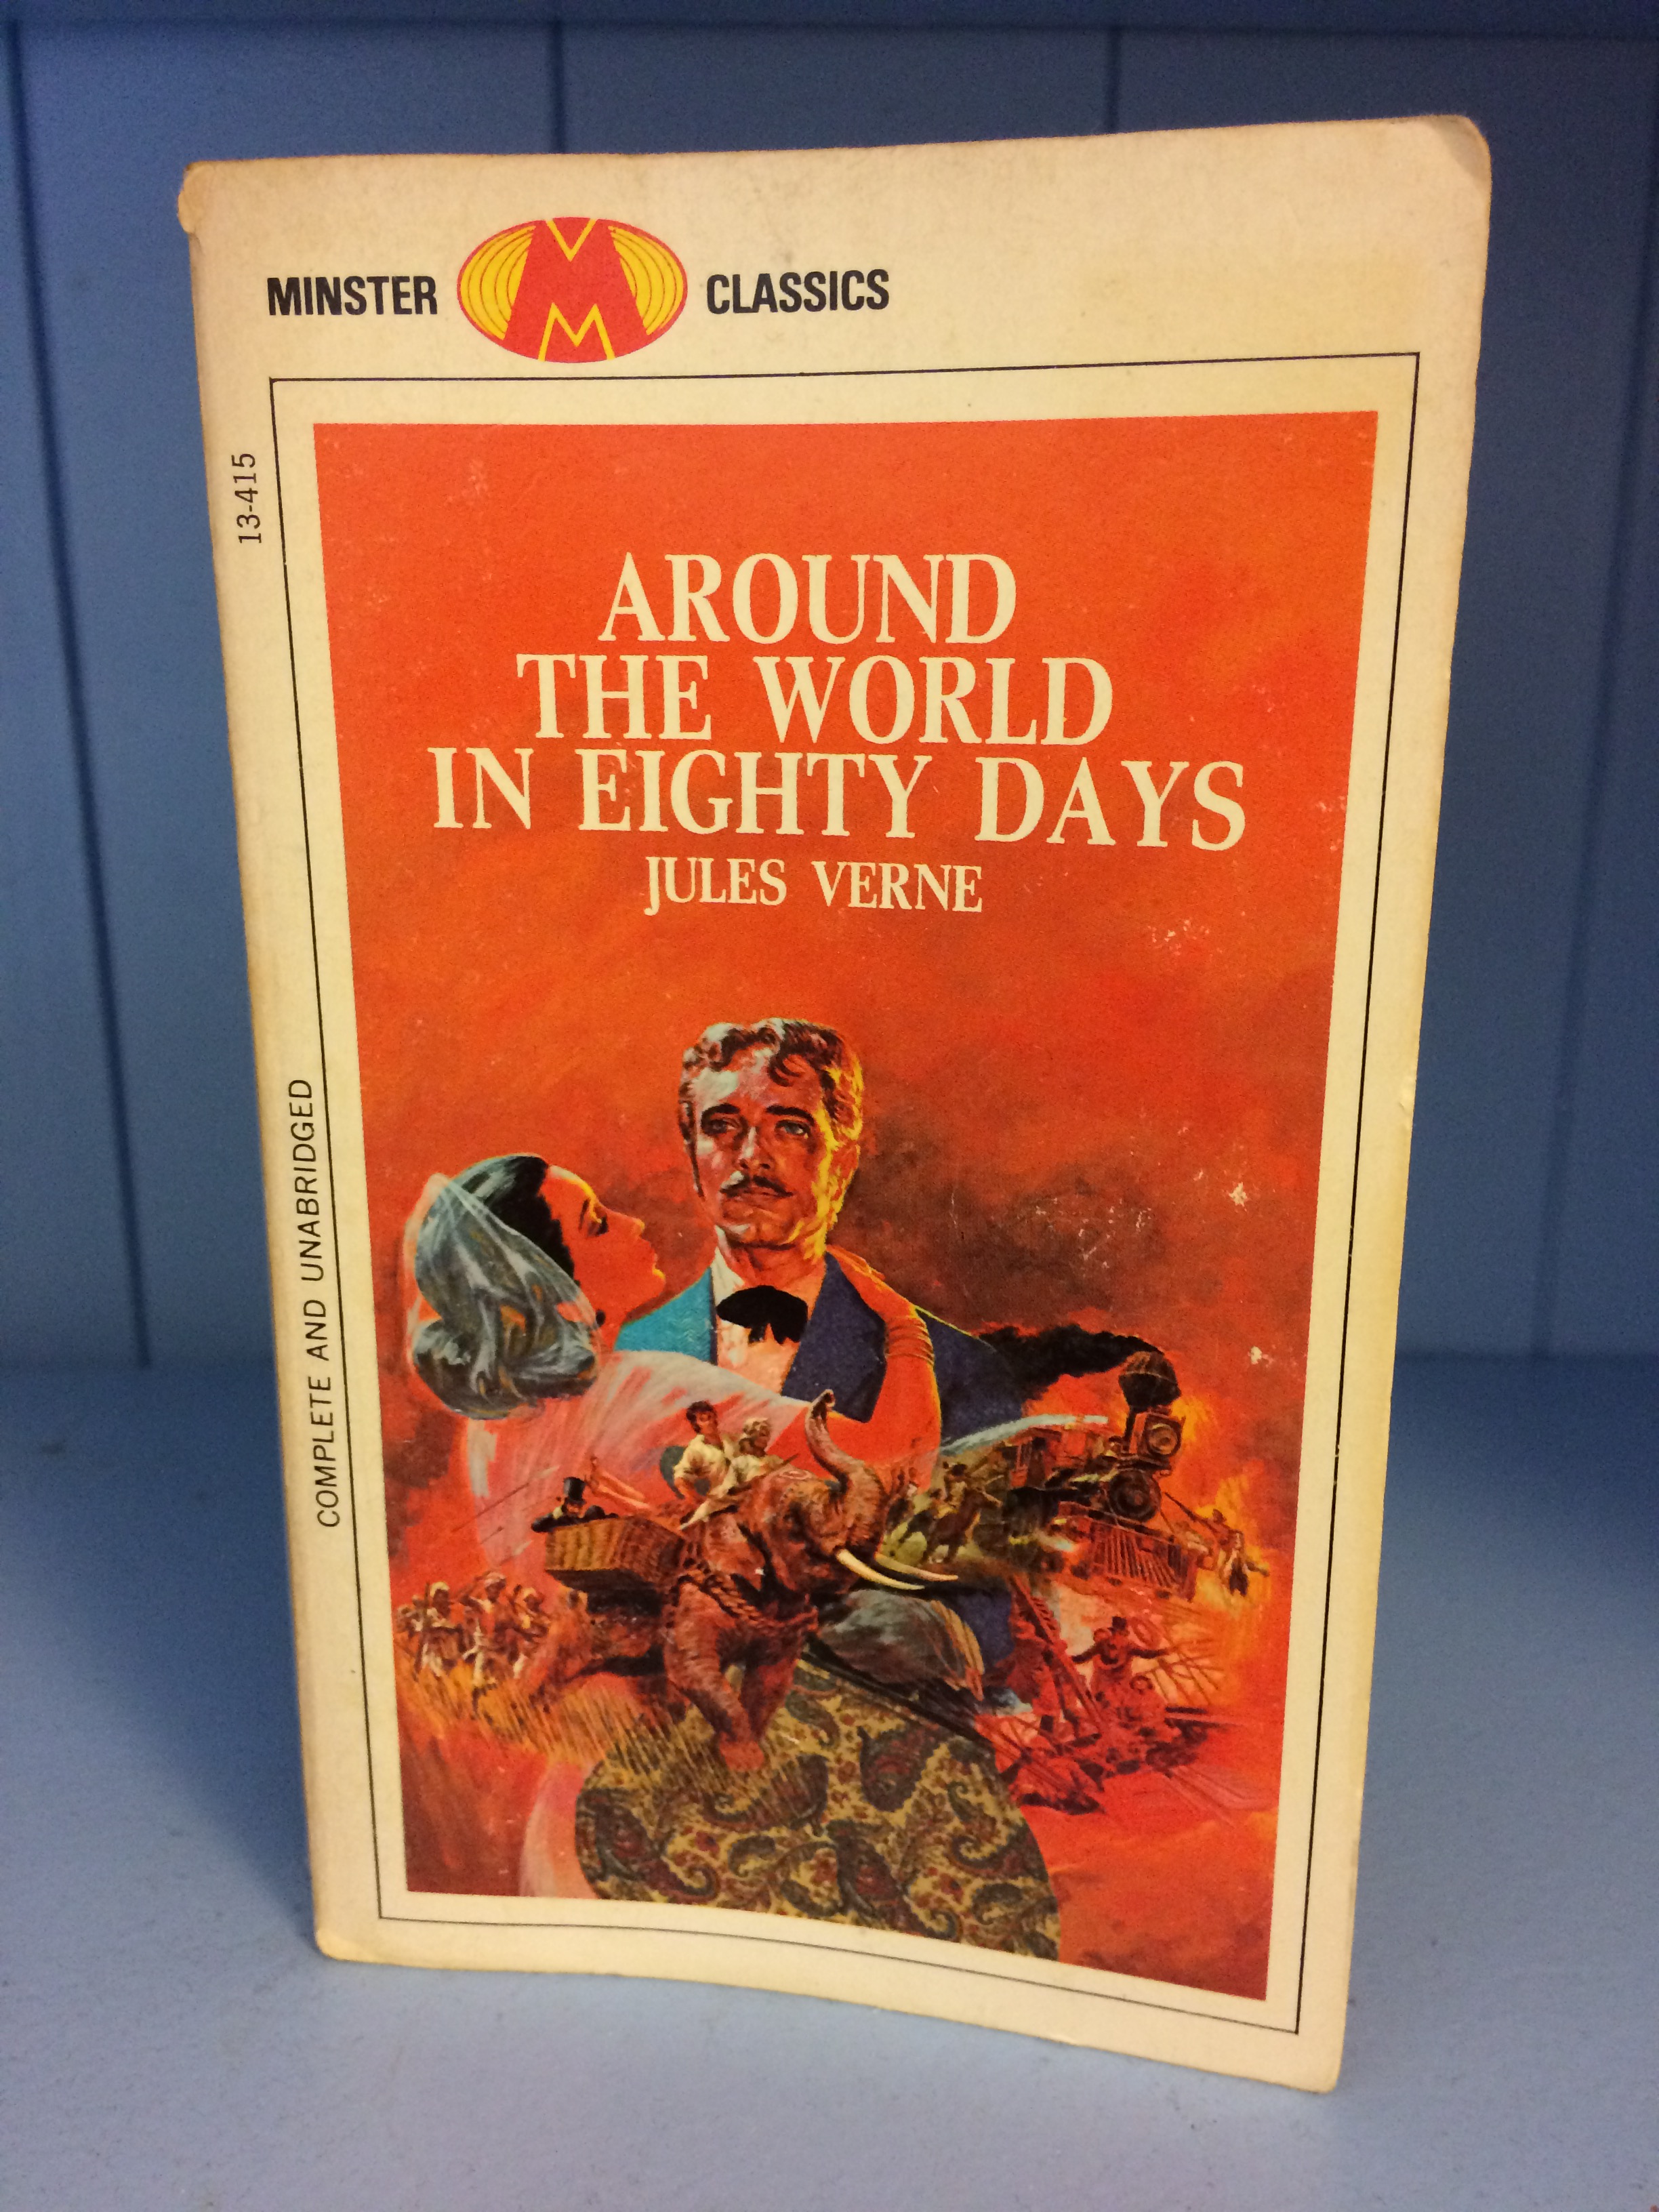 A book stood up on a blue shelf. The cover is predominately orange. Around the World in Eighty Days and Jules Verne are centred in the top third of the cover. Below you can see a man in a blue suit holding a woman in a pink dress with a white, but somewhat translucent headscarf. Circling around the two you can see a group of warriors, referred to as Sioux bandits in the text, the group on an elephant, a ship, and a steam train.